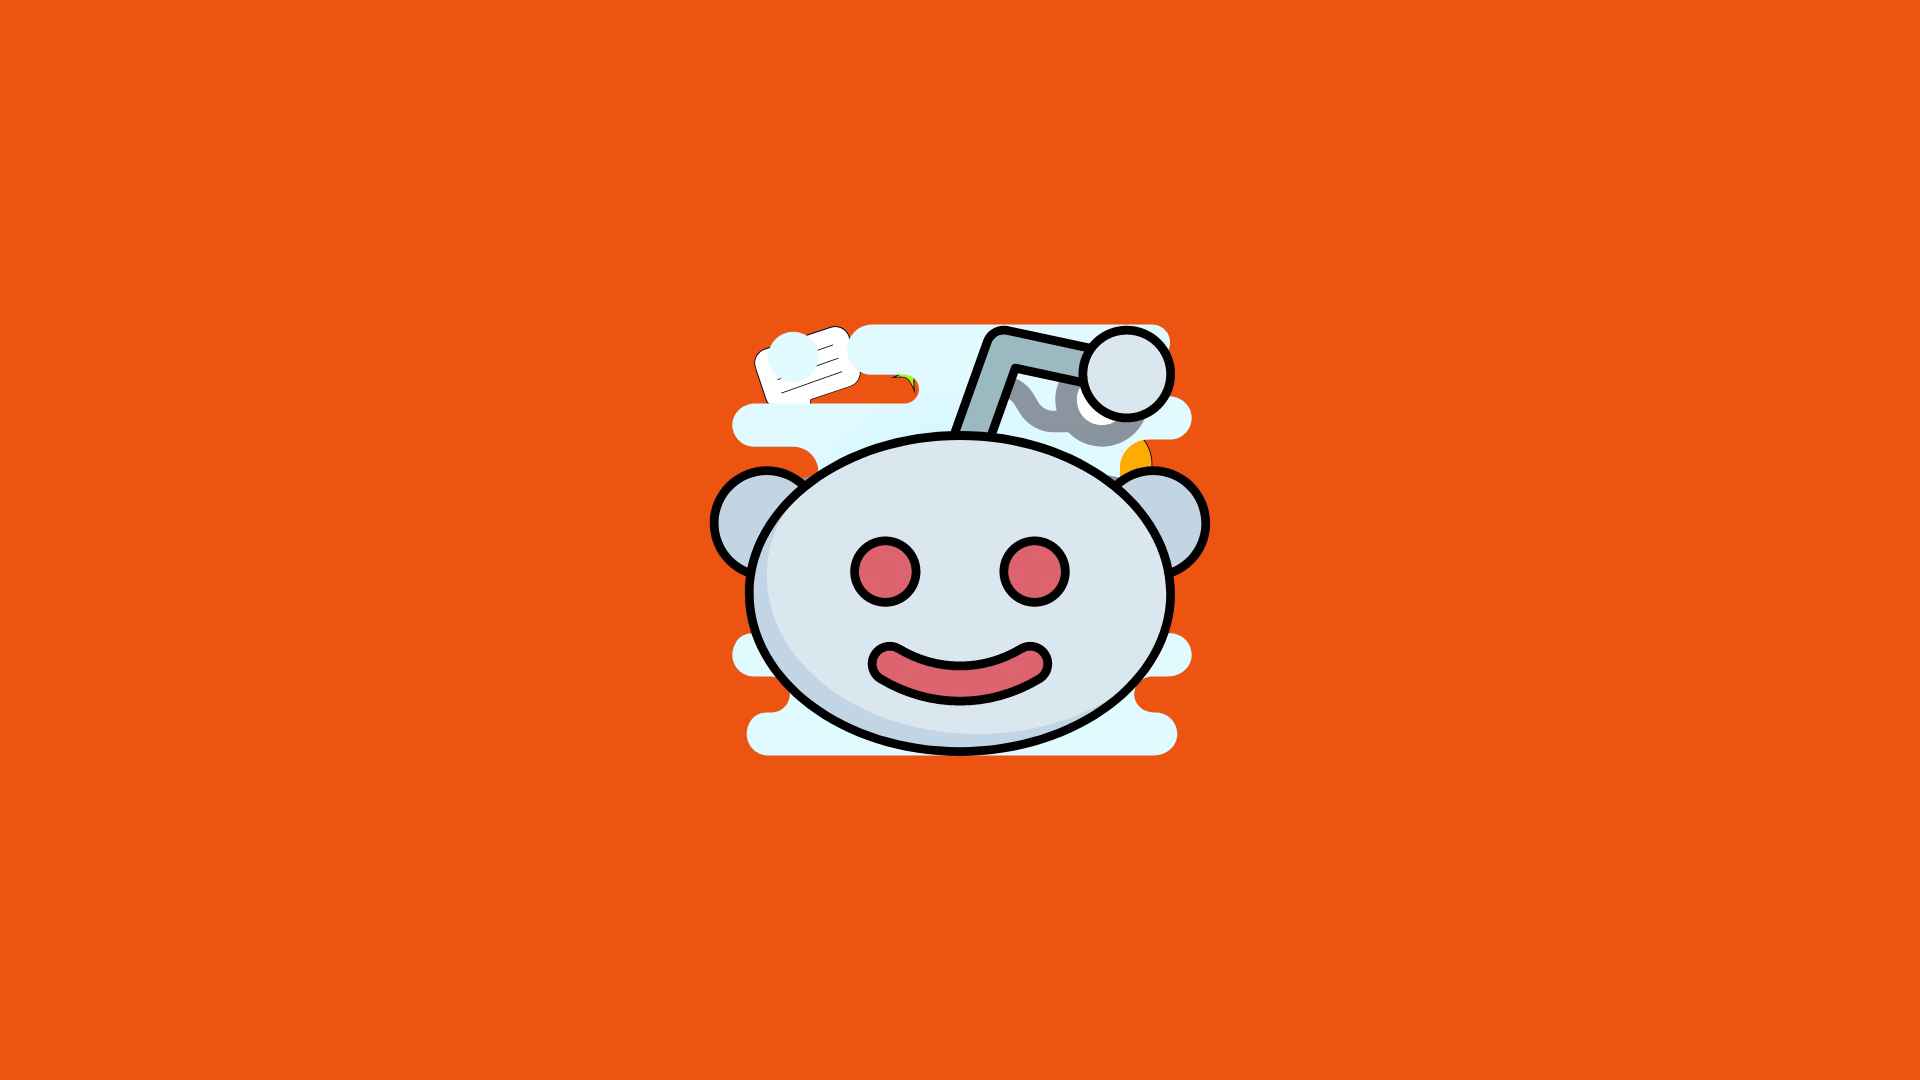 Is Reddit free to use, or are there any subscription fees involved?